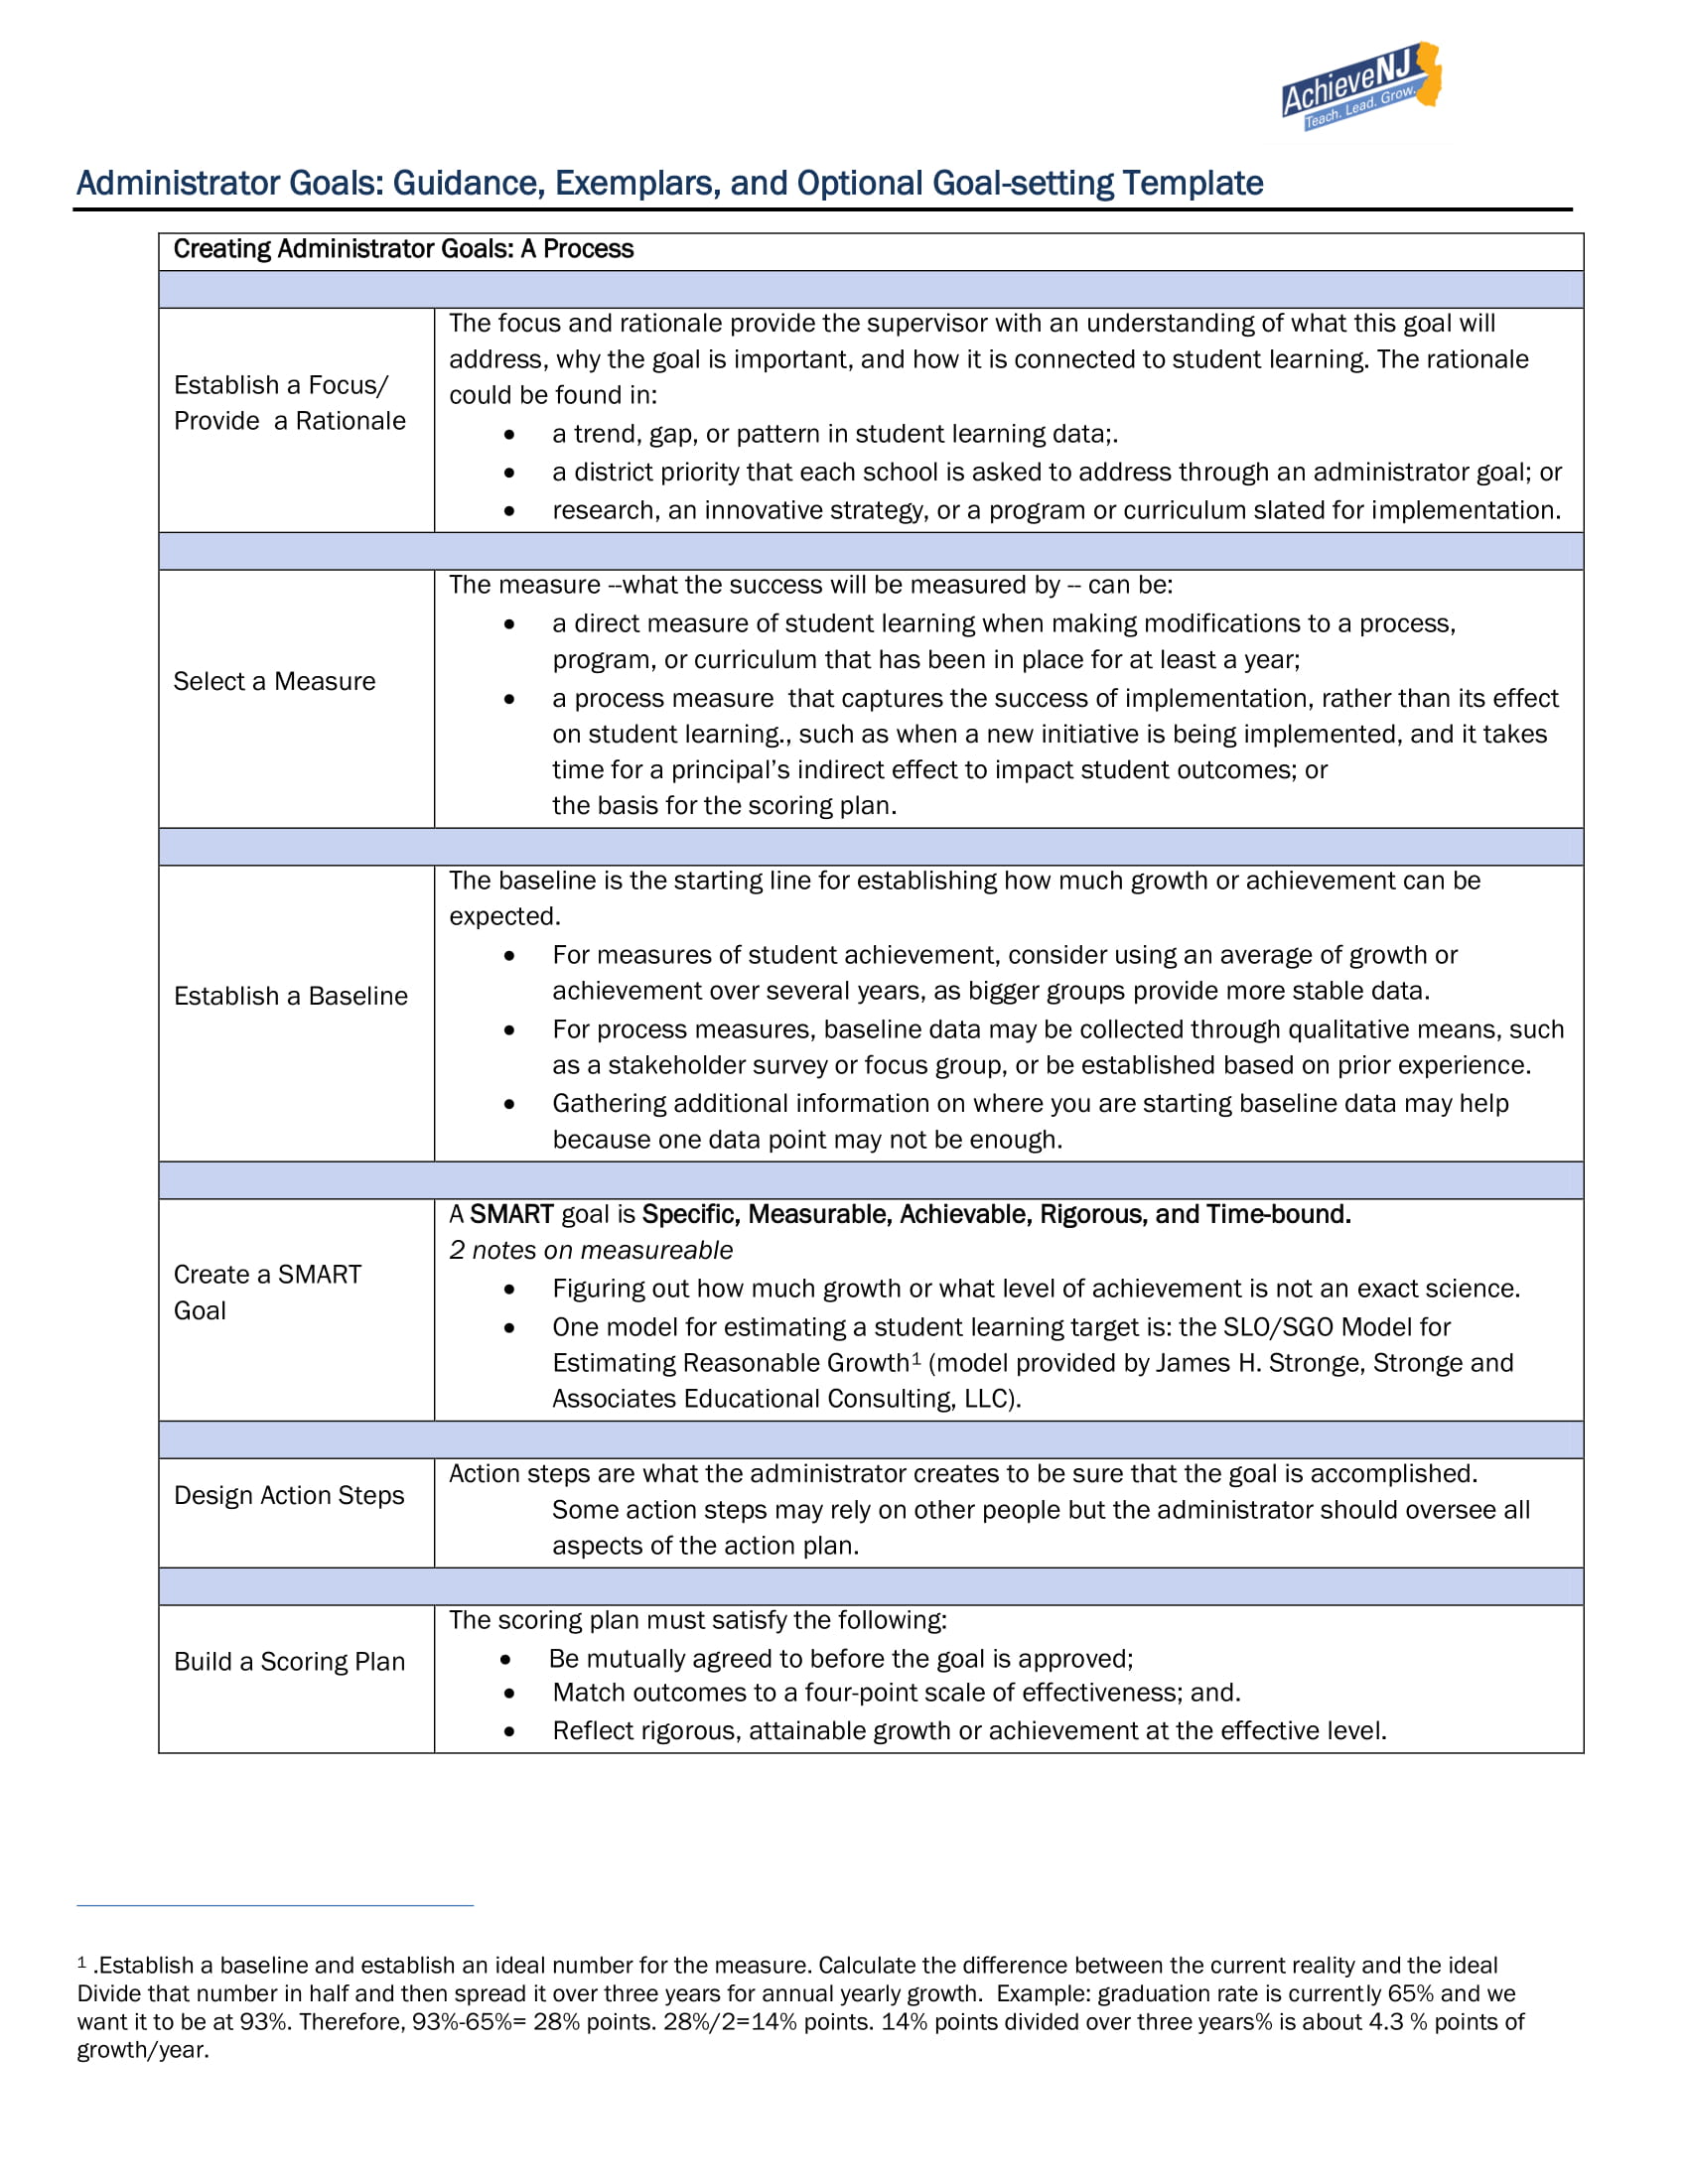 Administrator Goal Setting Template Example